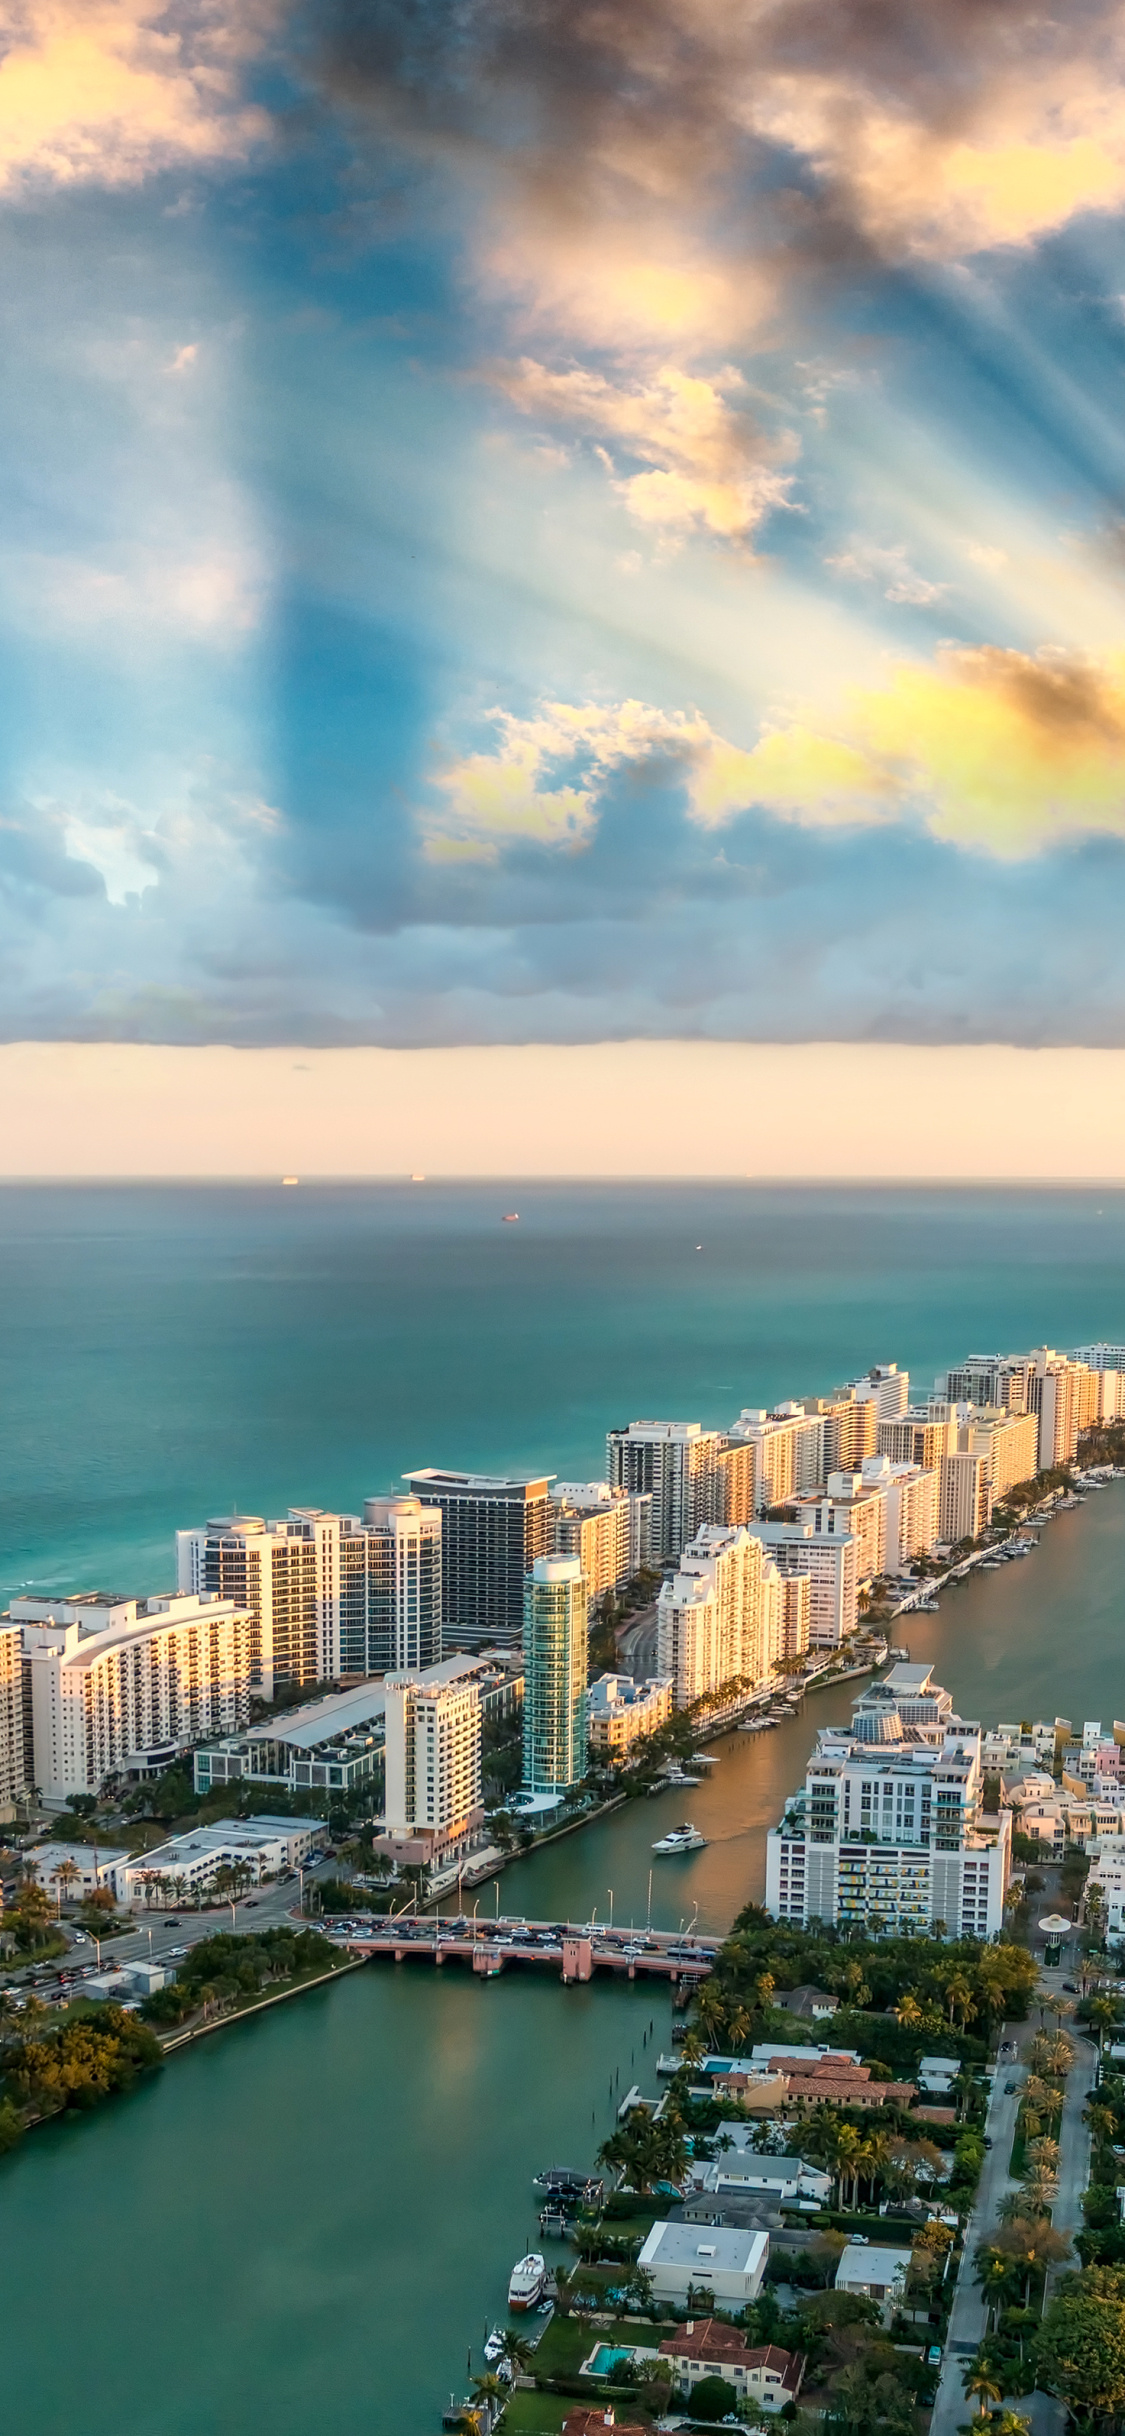 Miami travels, Man-made beauty, Urban environment, Architectural marvels, 1130x2440 HD Handy